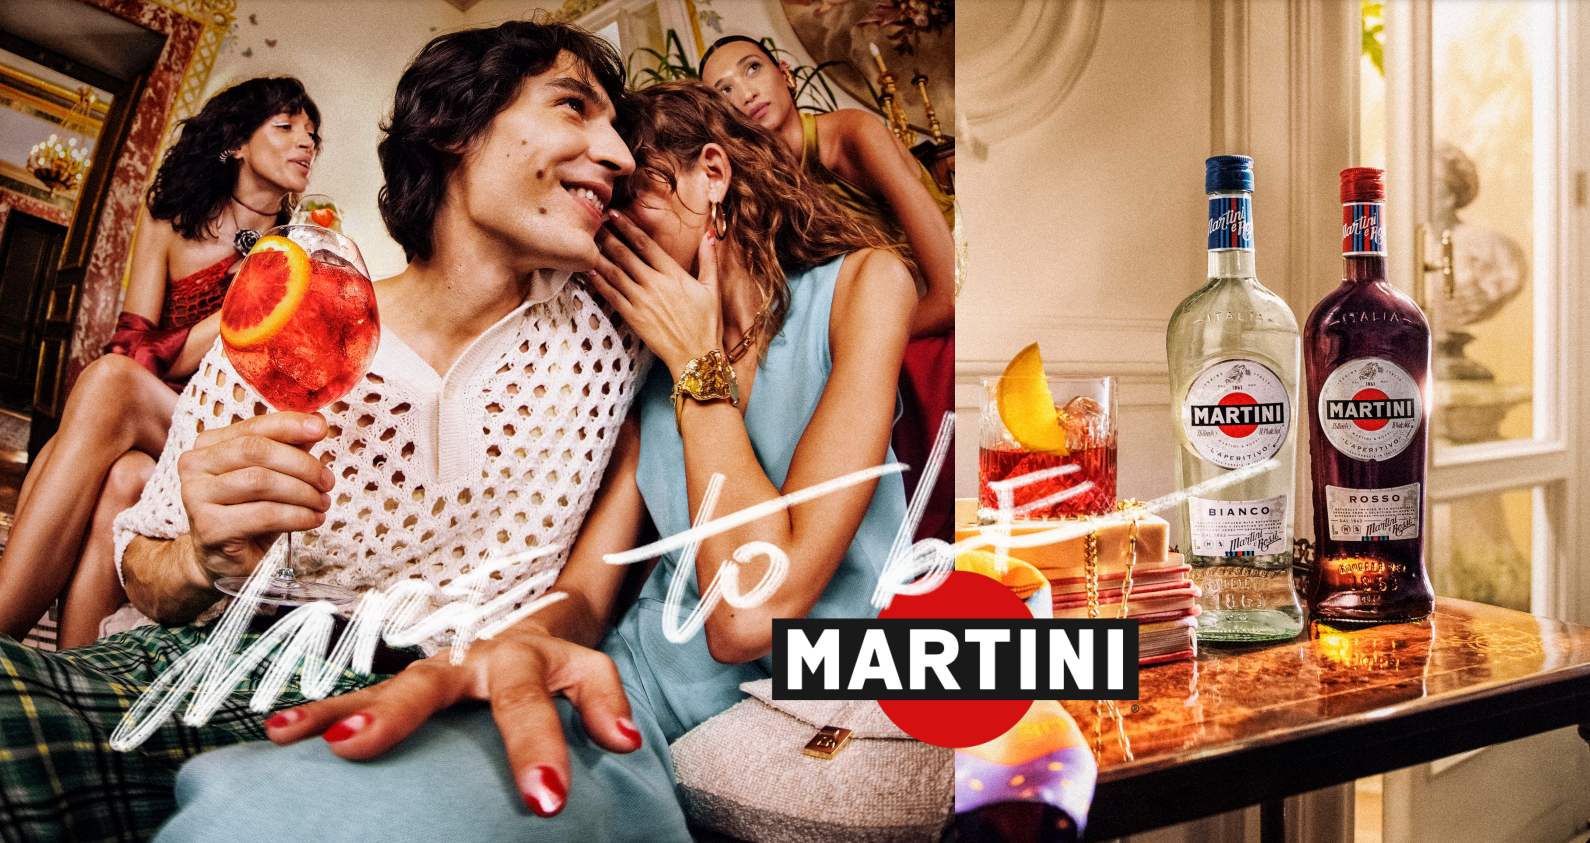 MARTINI® LAUNCHES NEW GLOBAL CAMPAIGN ‘MARTINI® DARE TO BE’, INSPIRED BY THE MODERN APERITIVO MOMENT